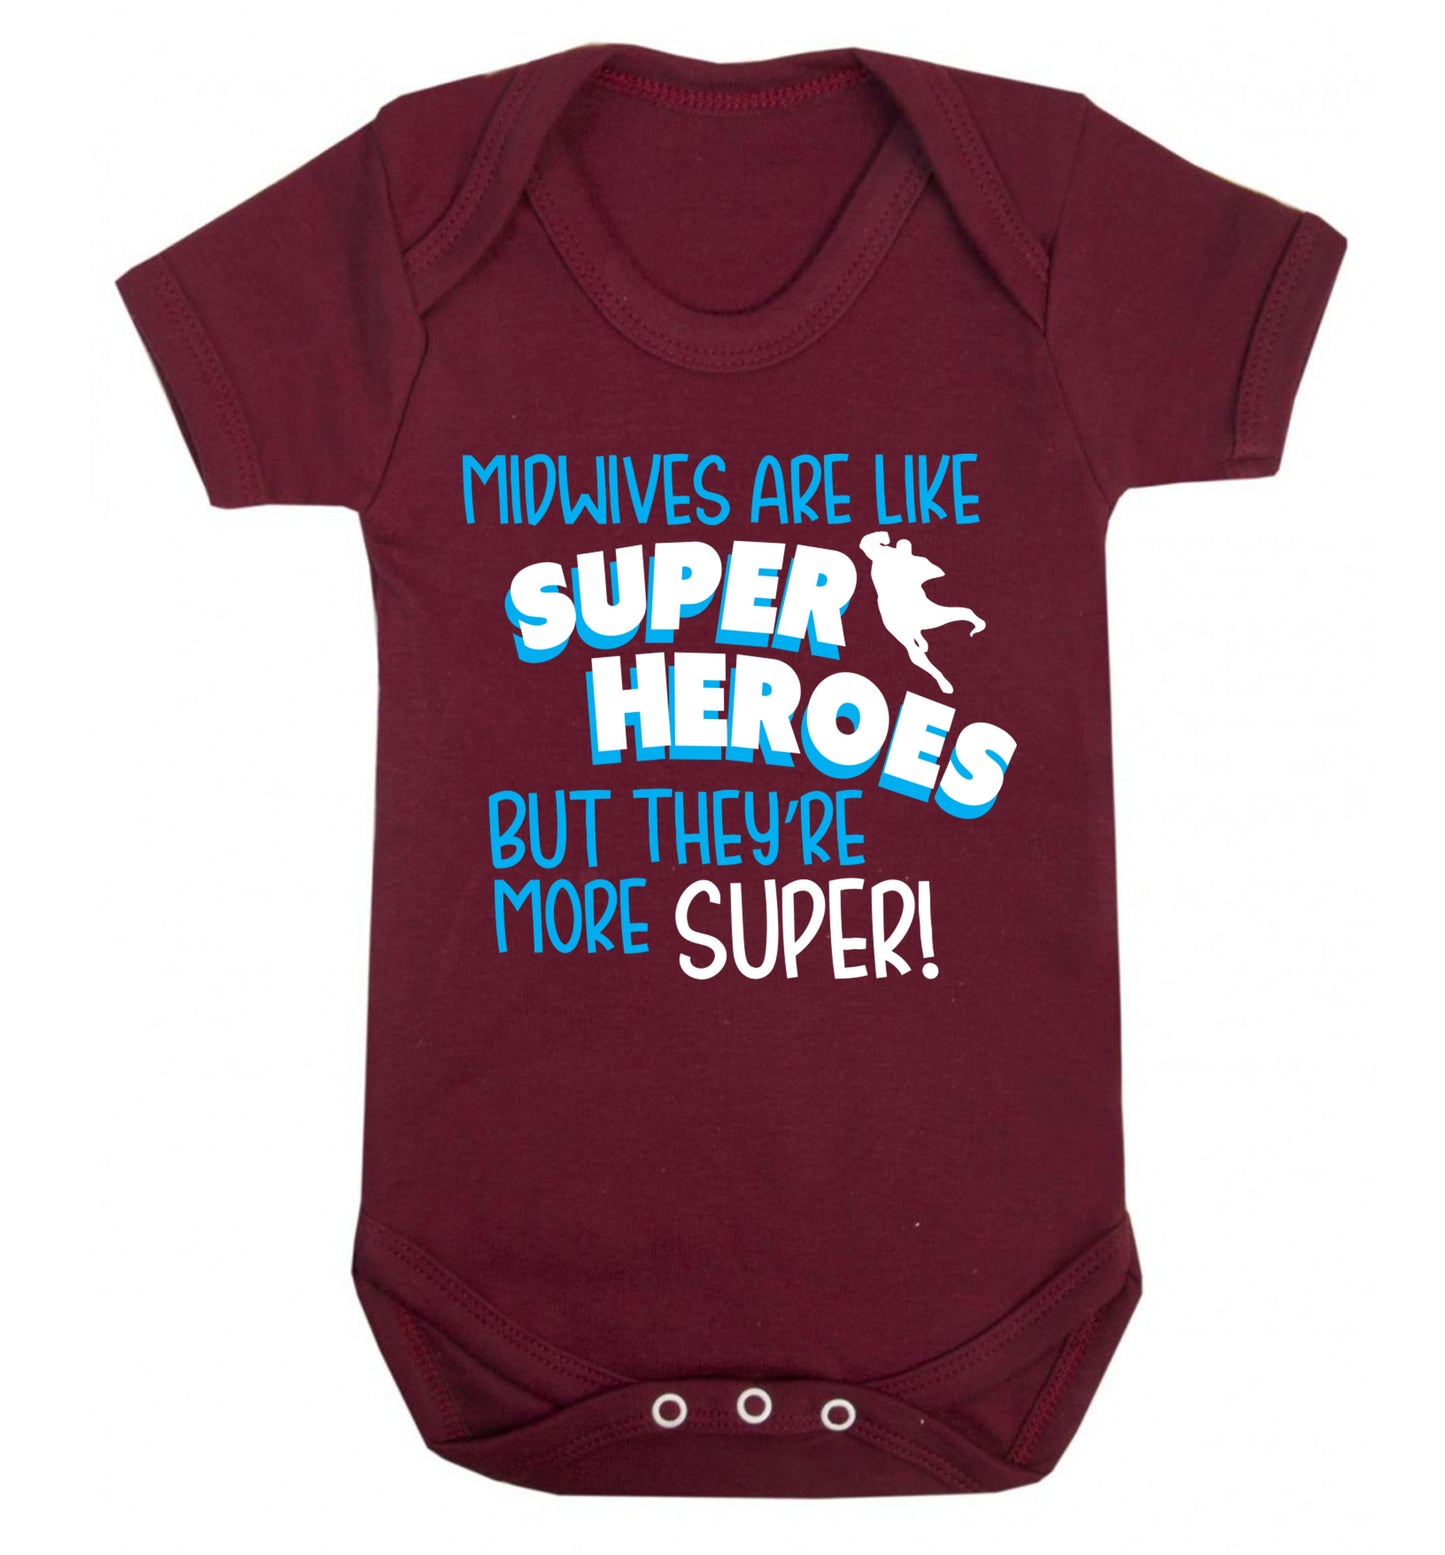 Midwives are like superheros but they're more super Baby Vest maroon 18-24 months